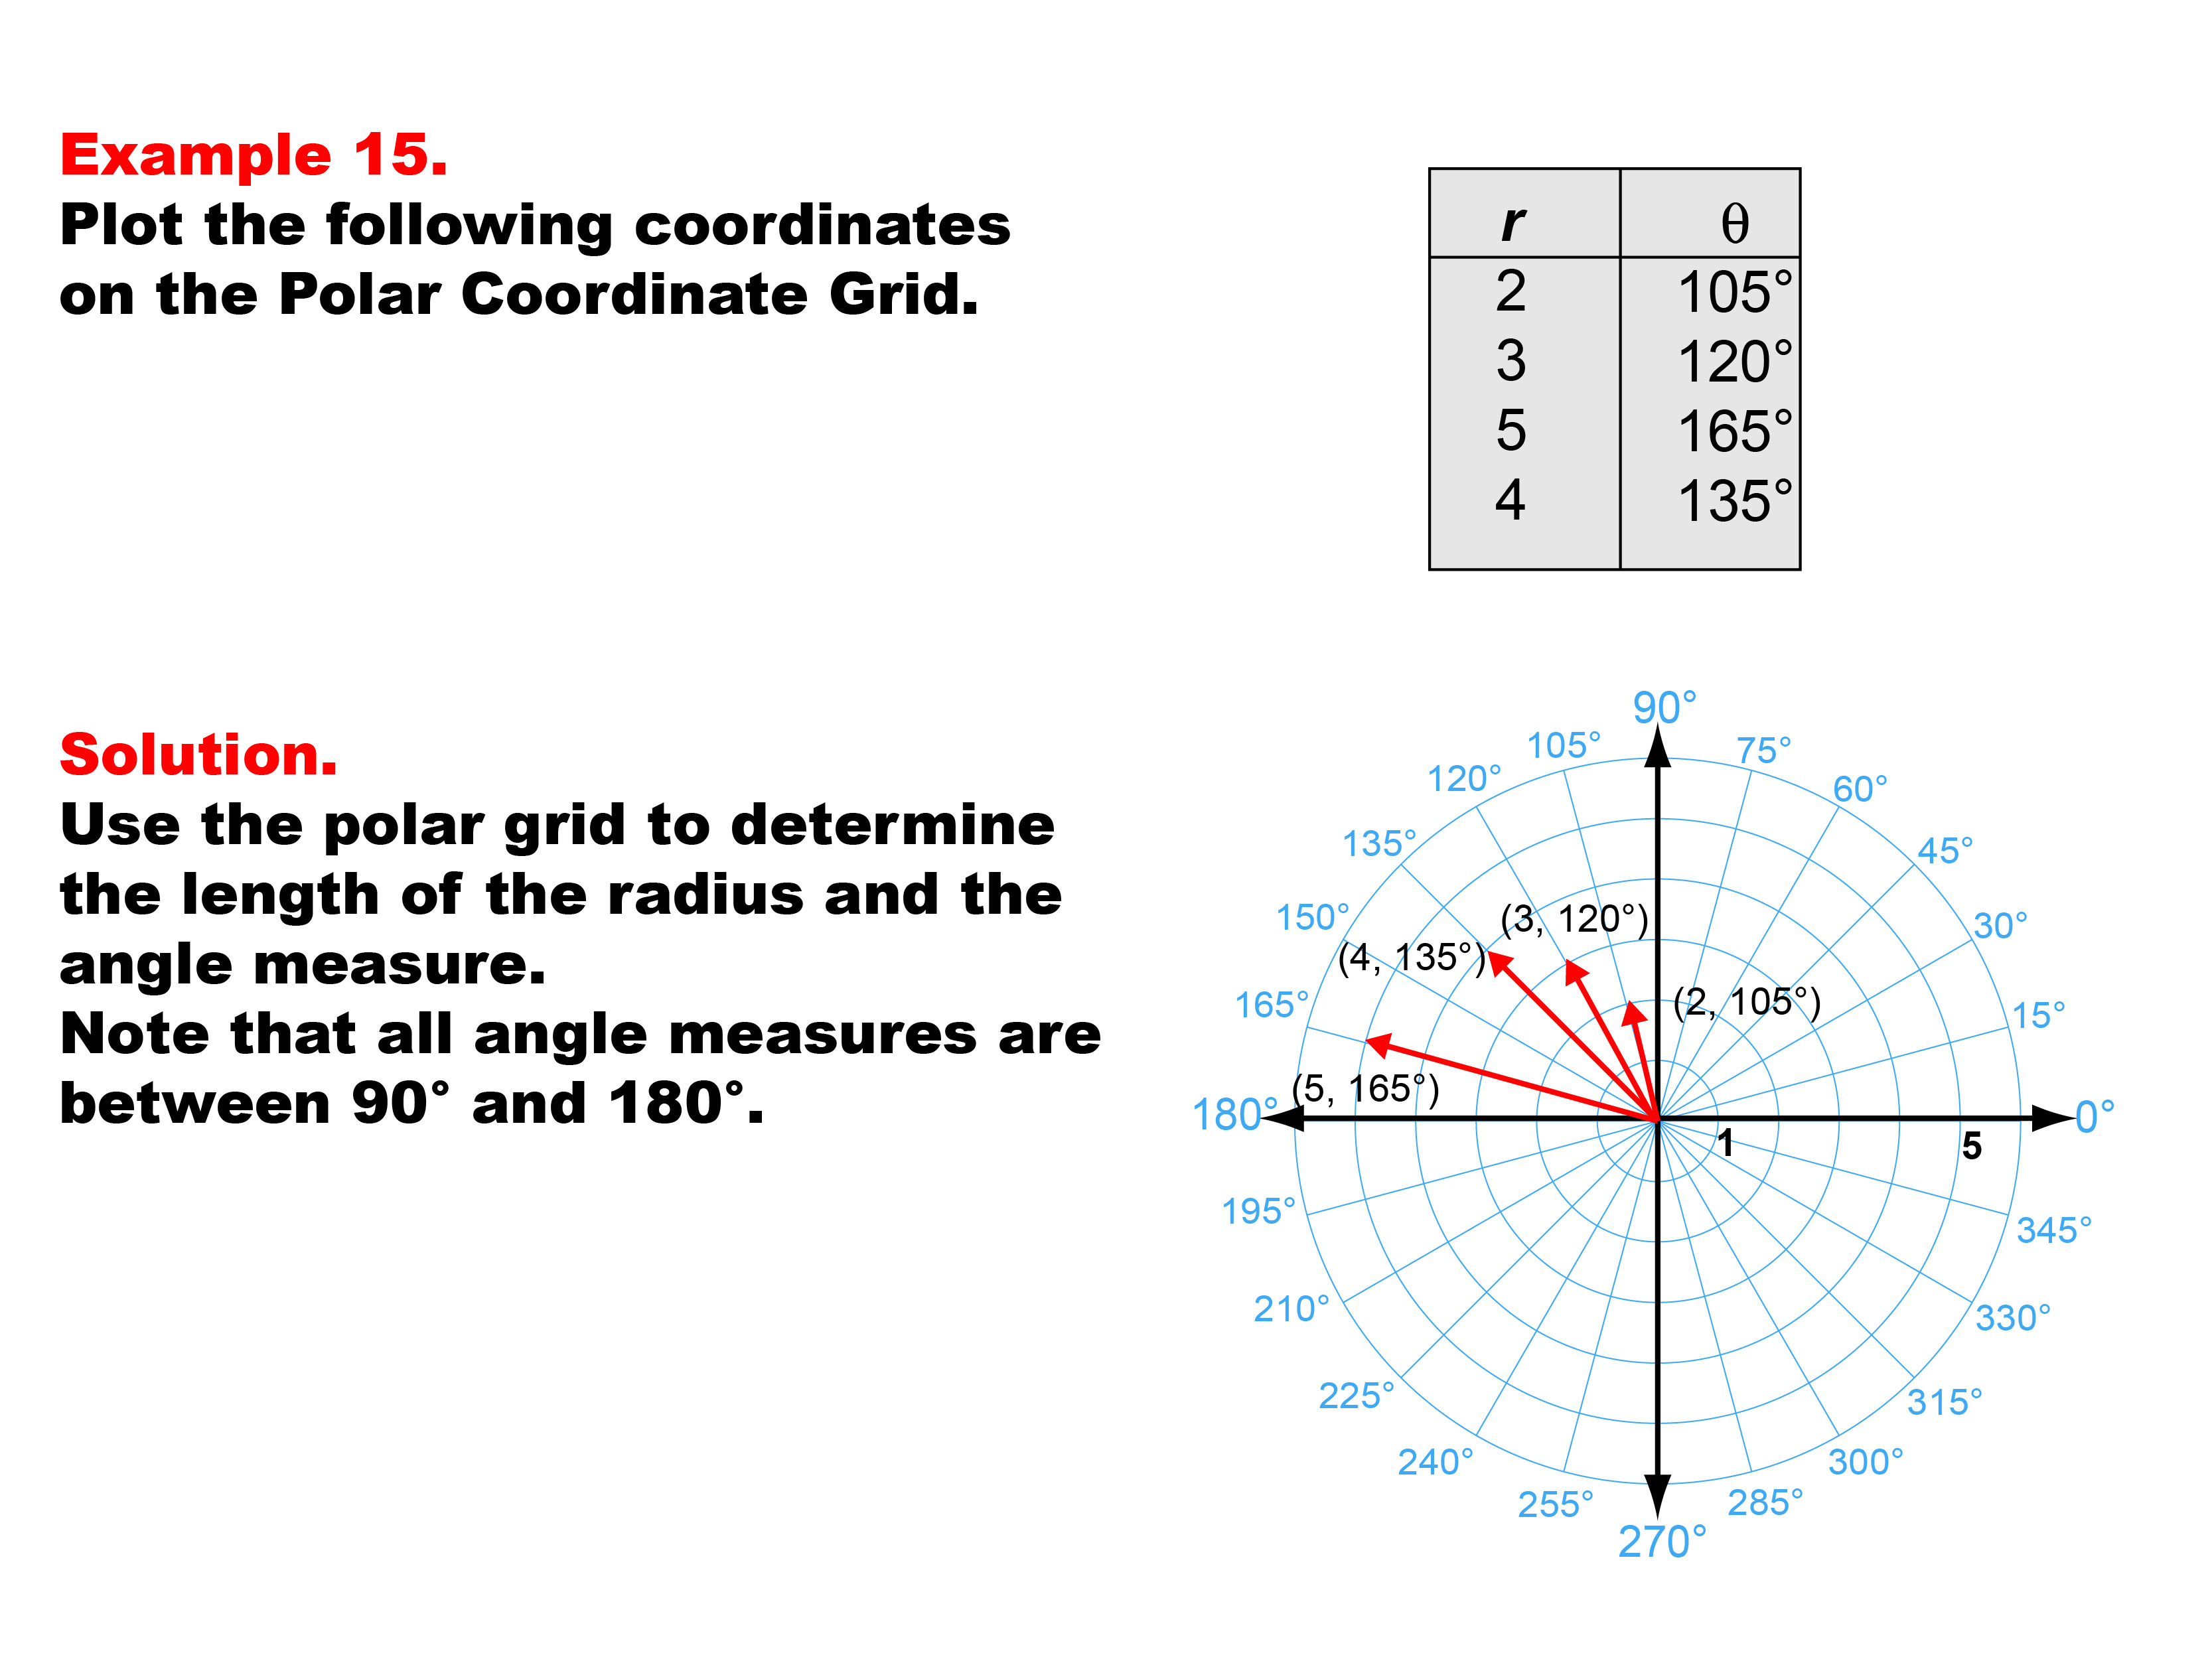 Coordinate Systems: Example 15. Graphing coordinates on the Polar Coordinate System for angles greater than 90 degrees and less than 180 degrees.